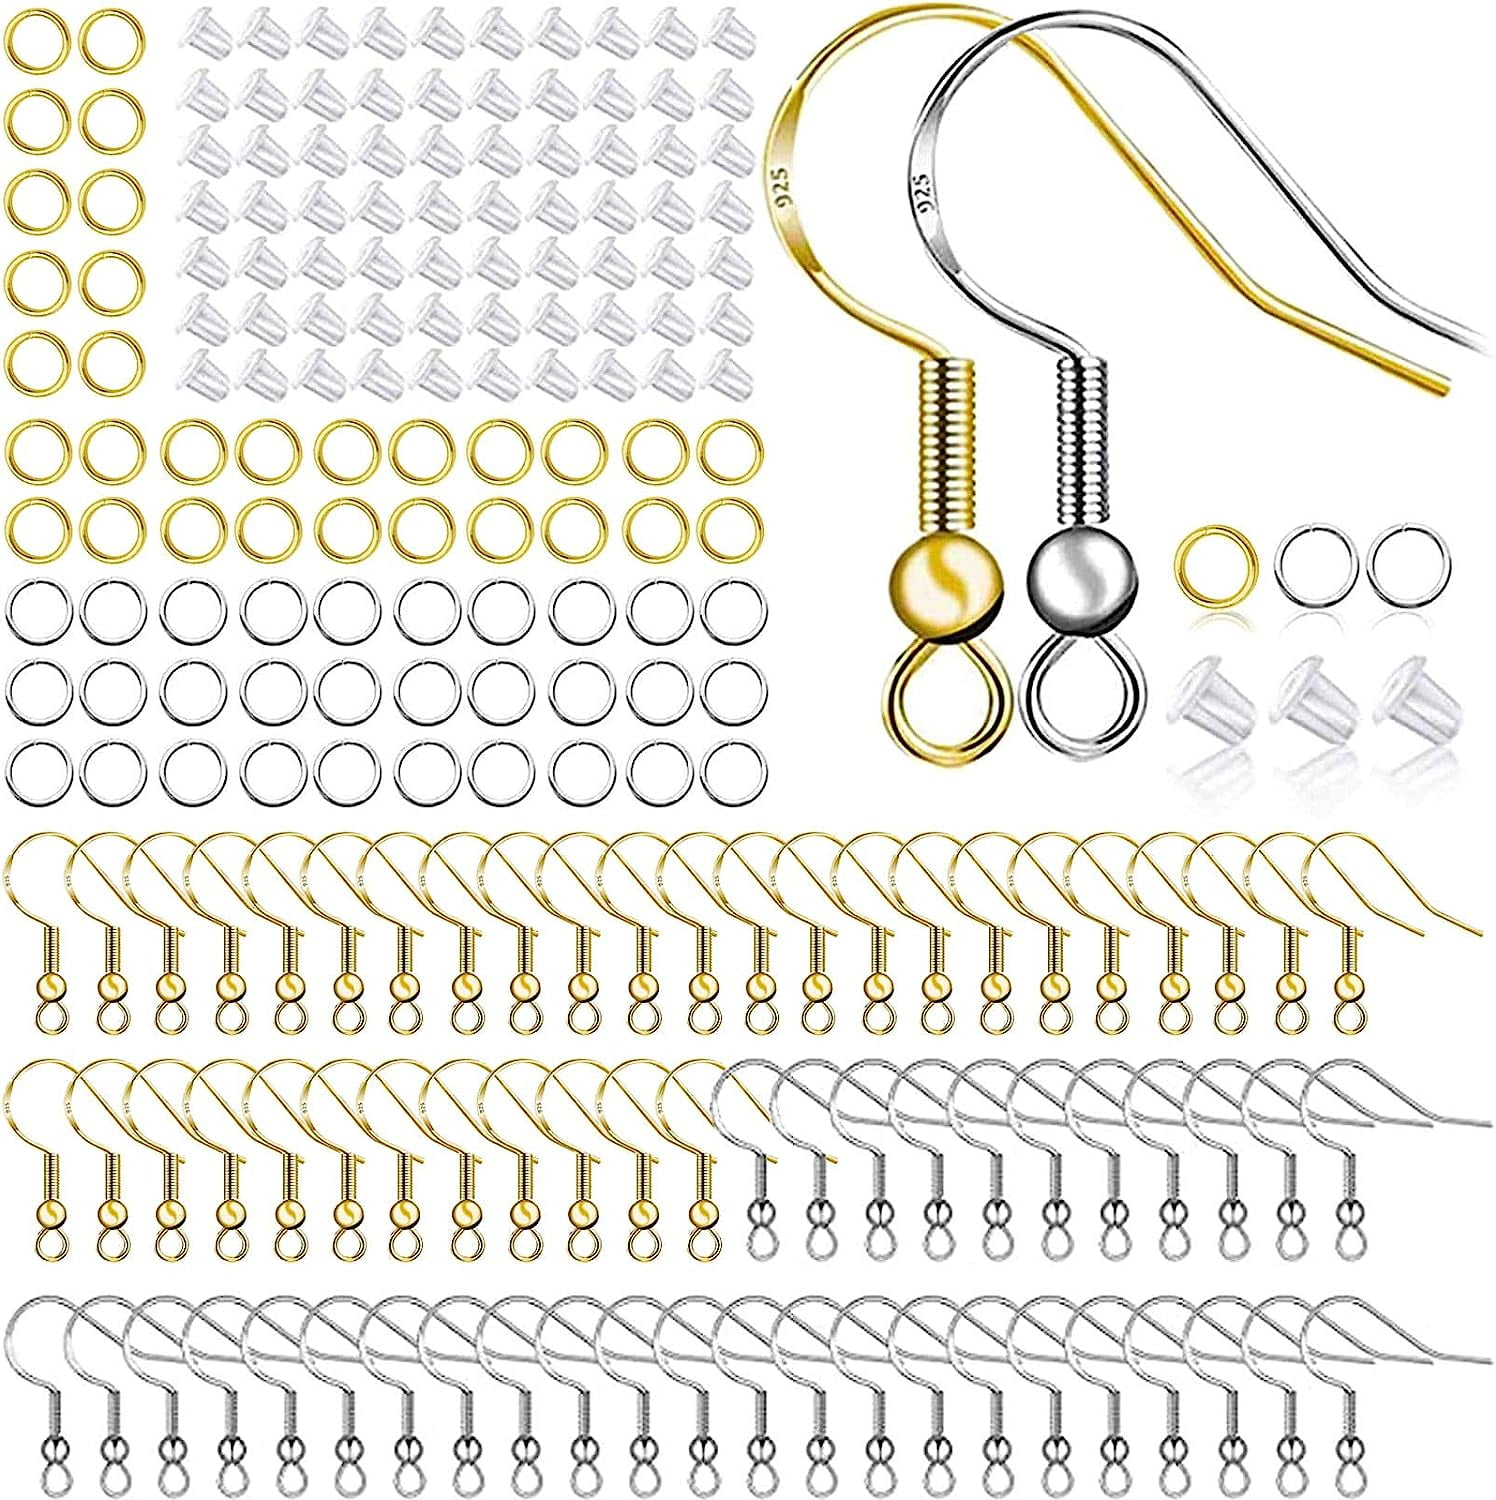  100 PCS/50 Pairs Earring Hooks, 925 Silver/Gold-Plated  Hypoallergenic Earring Hooks for Jewelry Making, 300 PCS Upgrade Earring  Making kit, Earring Making Supplies with Earring Backs and Jump Rings